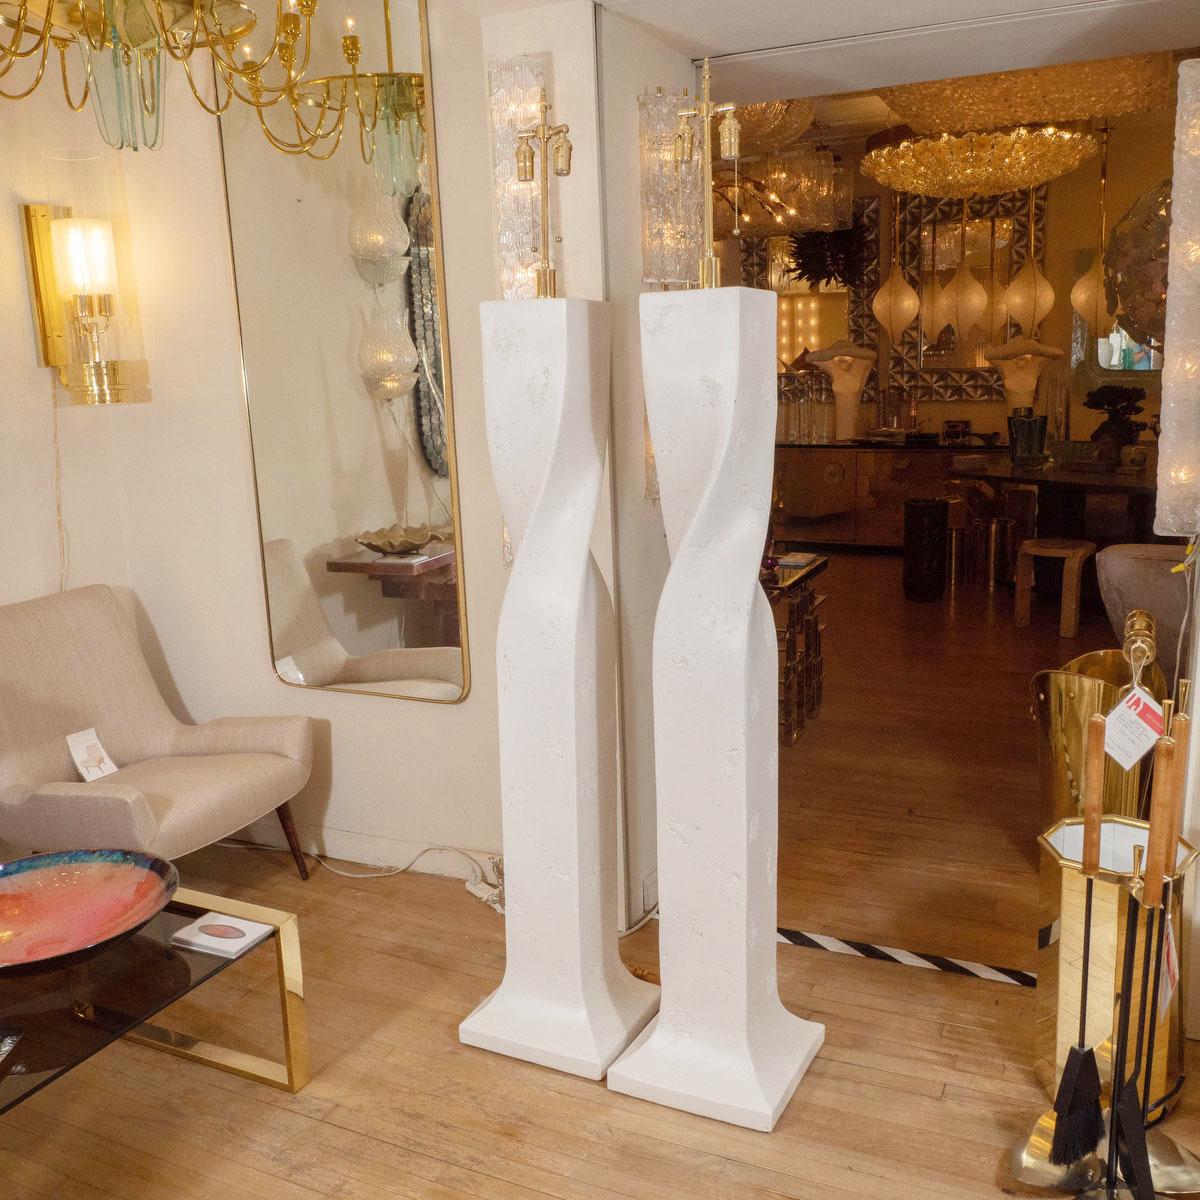 Pair of white composite plaster twisted floor lamps.